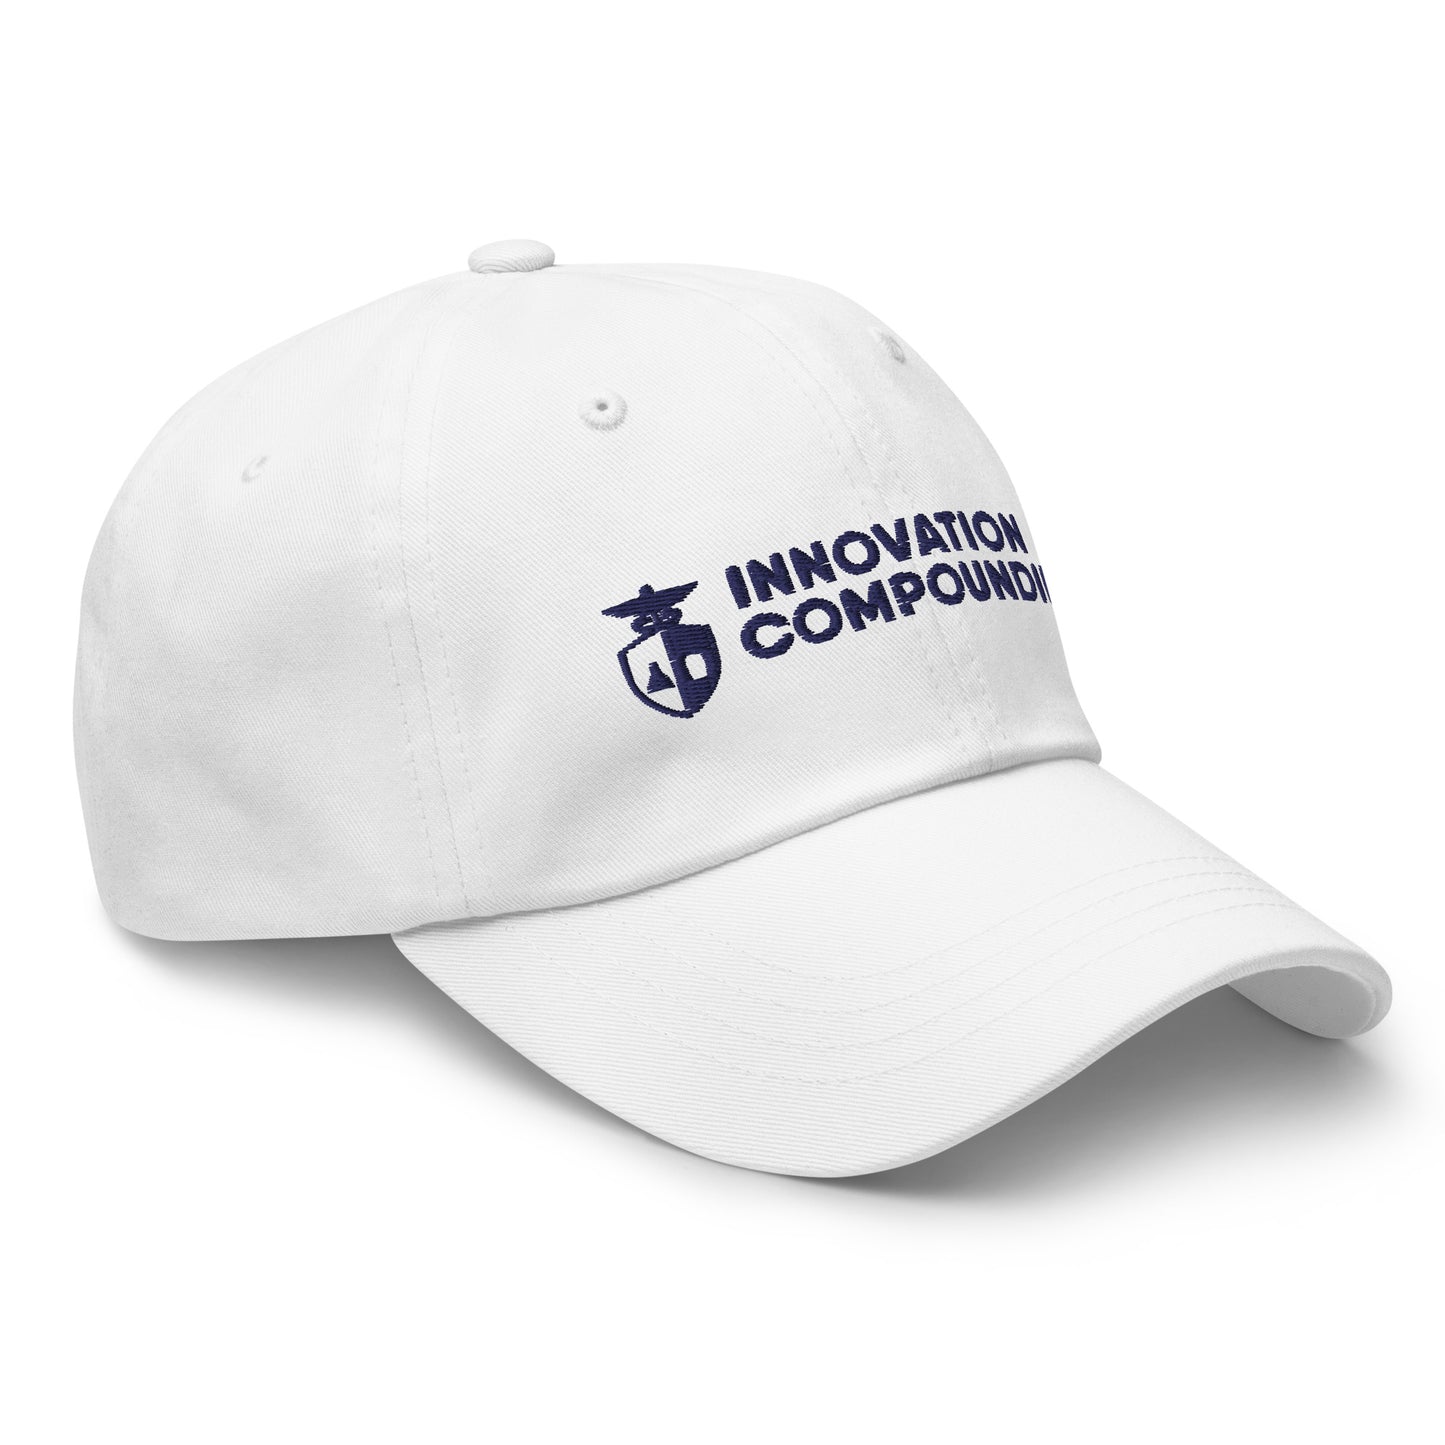 Dad hat - Innovation Compounding